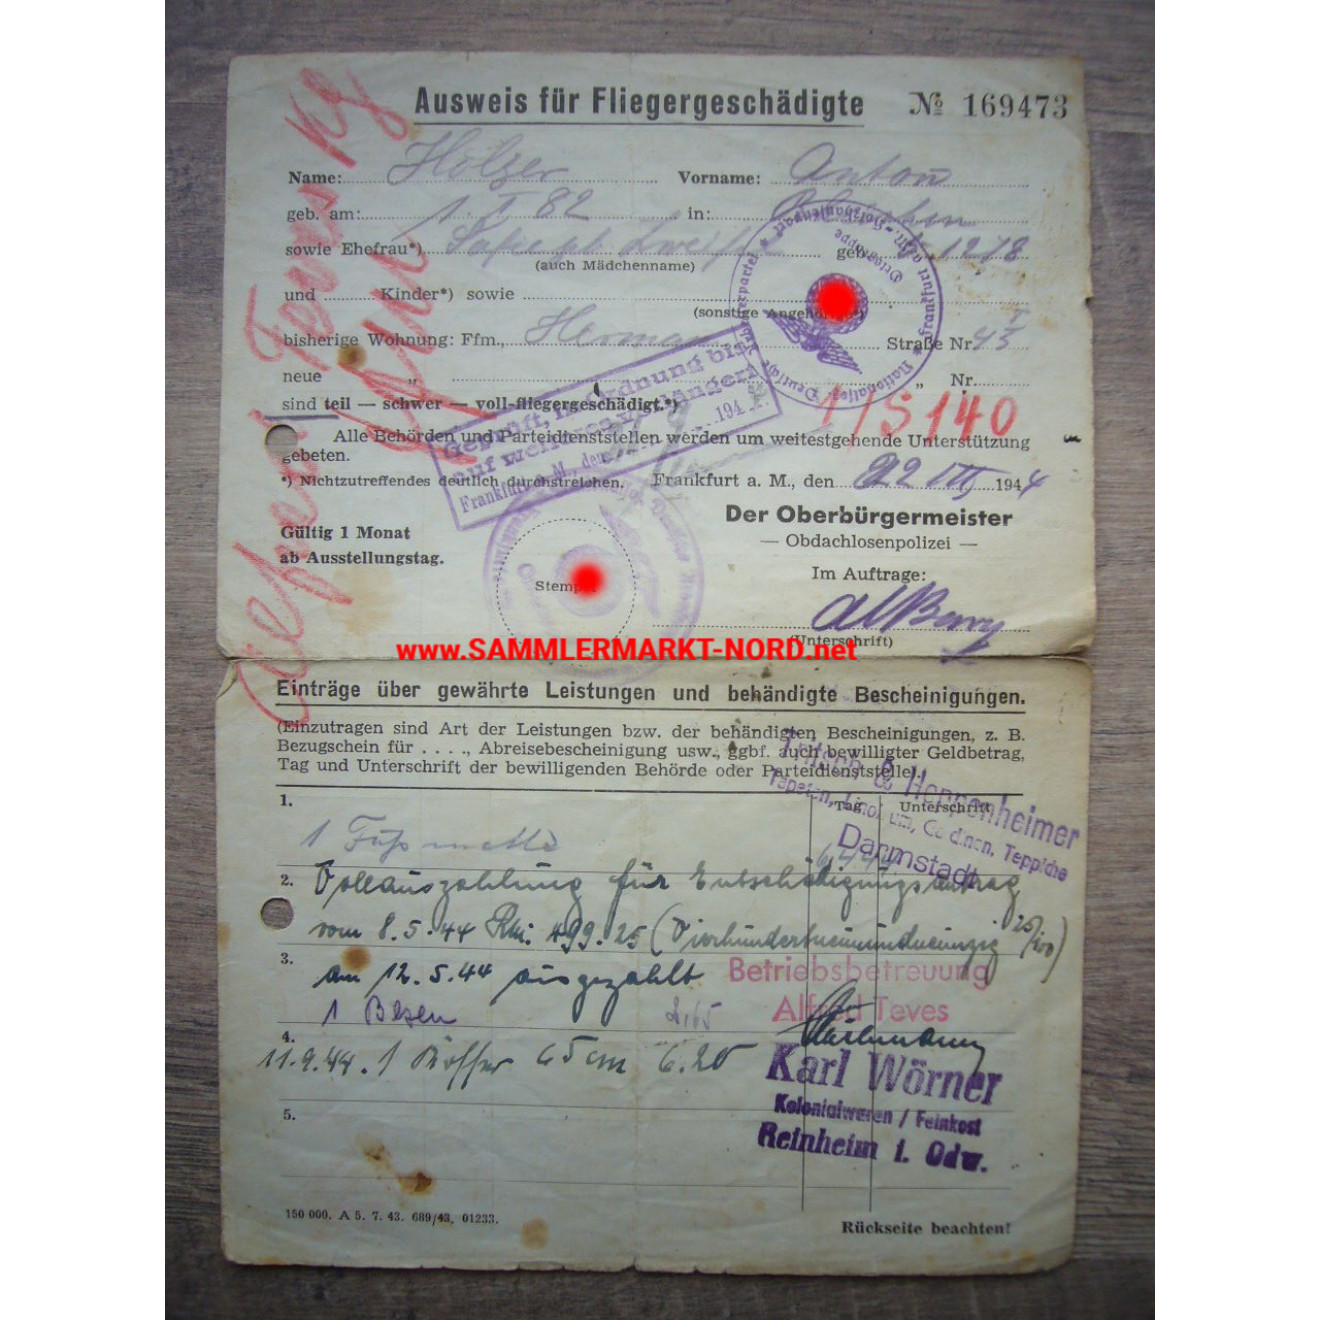 Identity card for bombed persons - Frankfurt am Main 1944